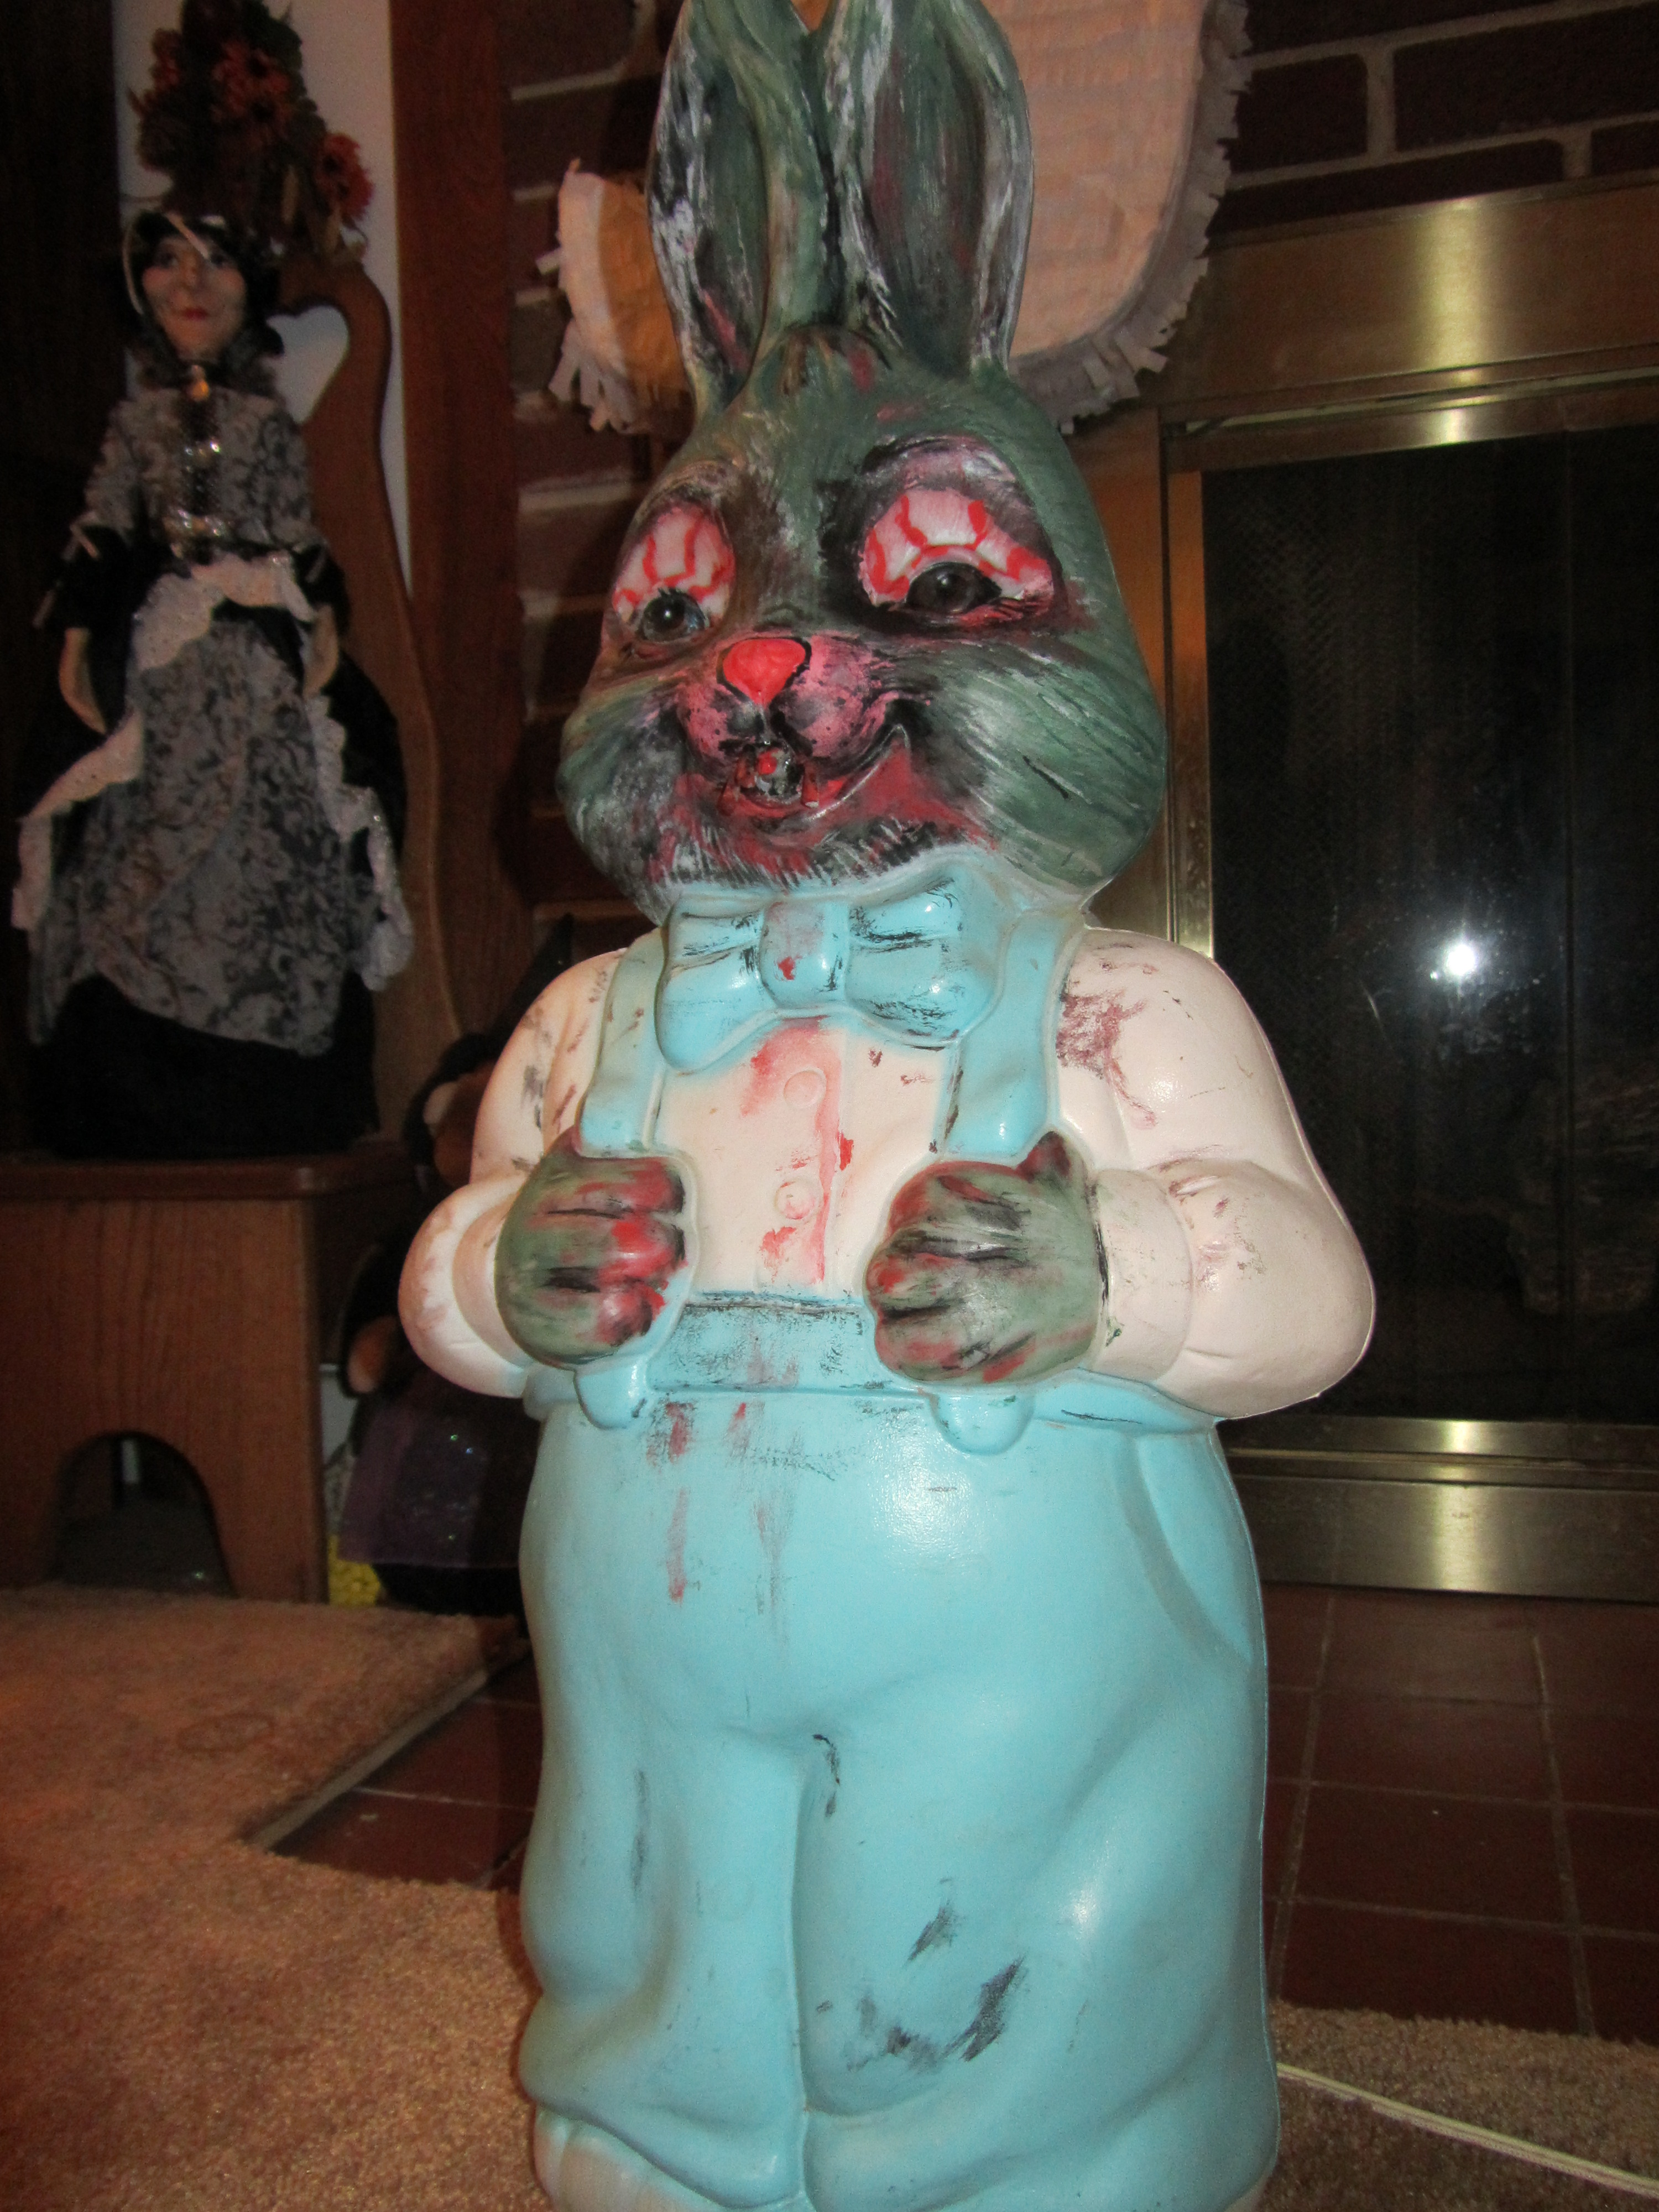 http://frugalfrightsanddelights.com/wp-content/uploads/2013/10/zombie-bunny.jpg?w=225